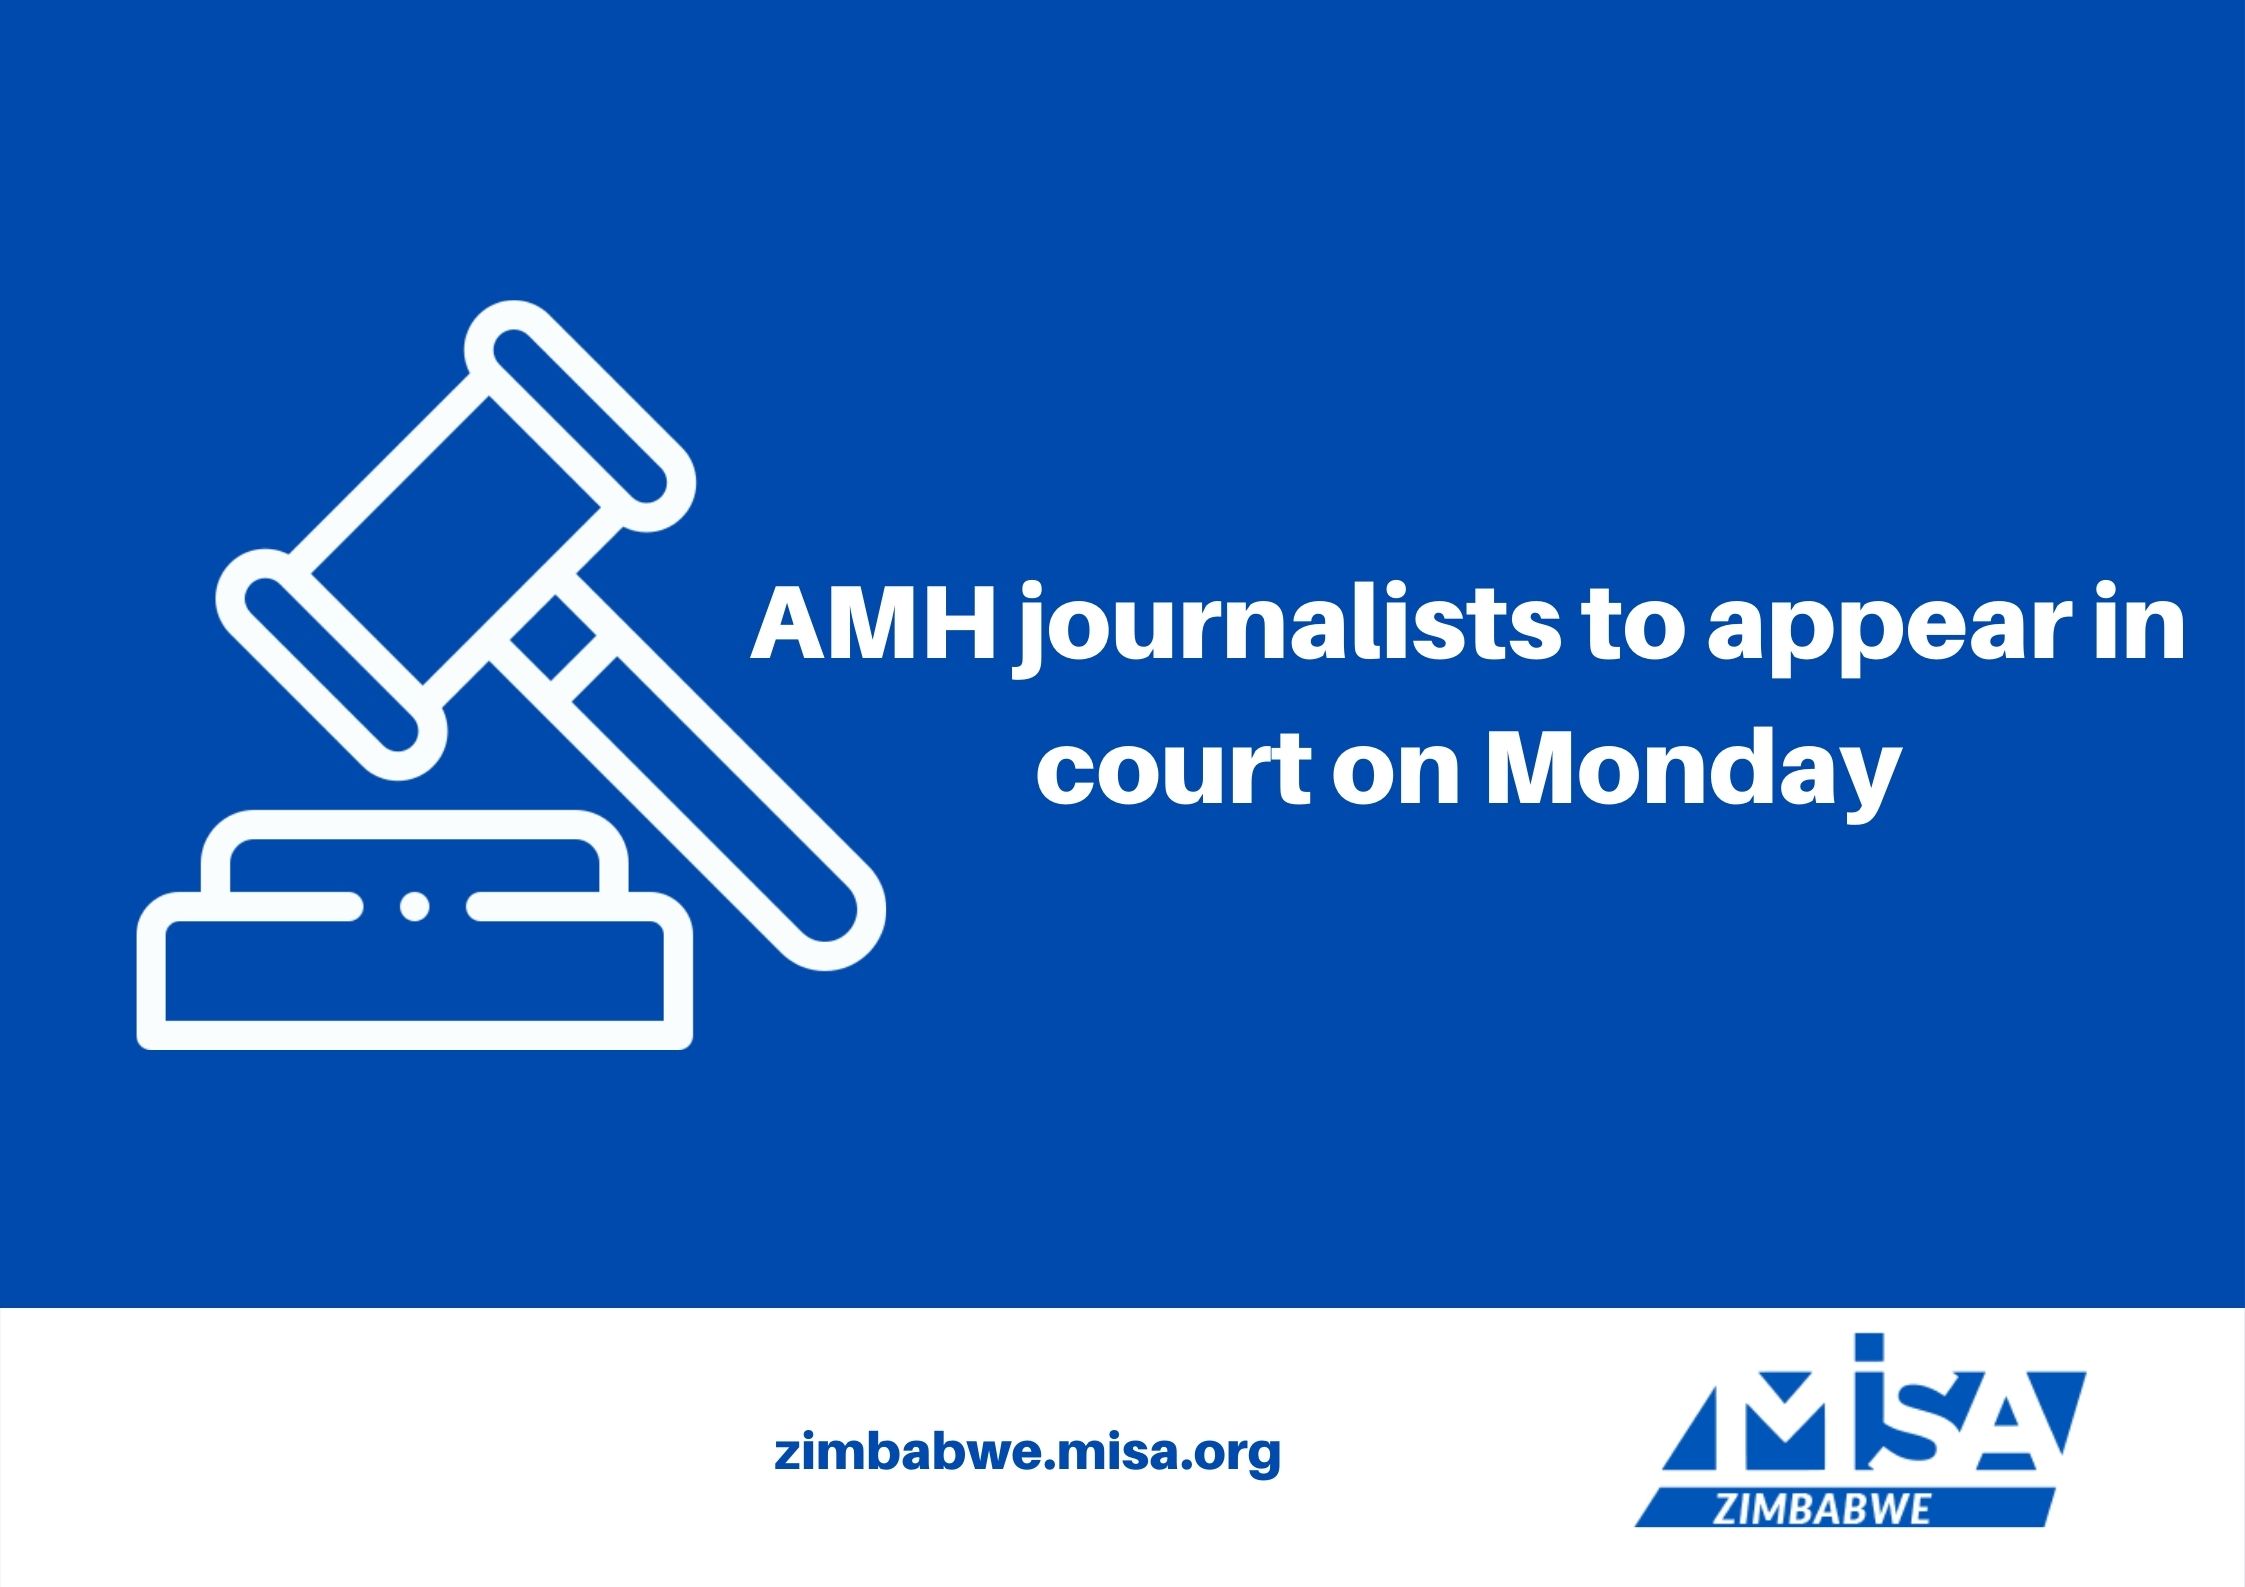 AMH journalists to appear in court on Monday